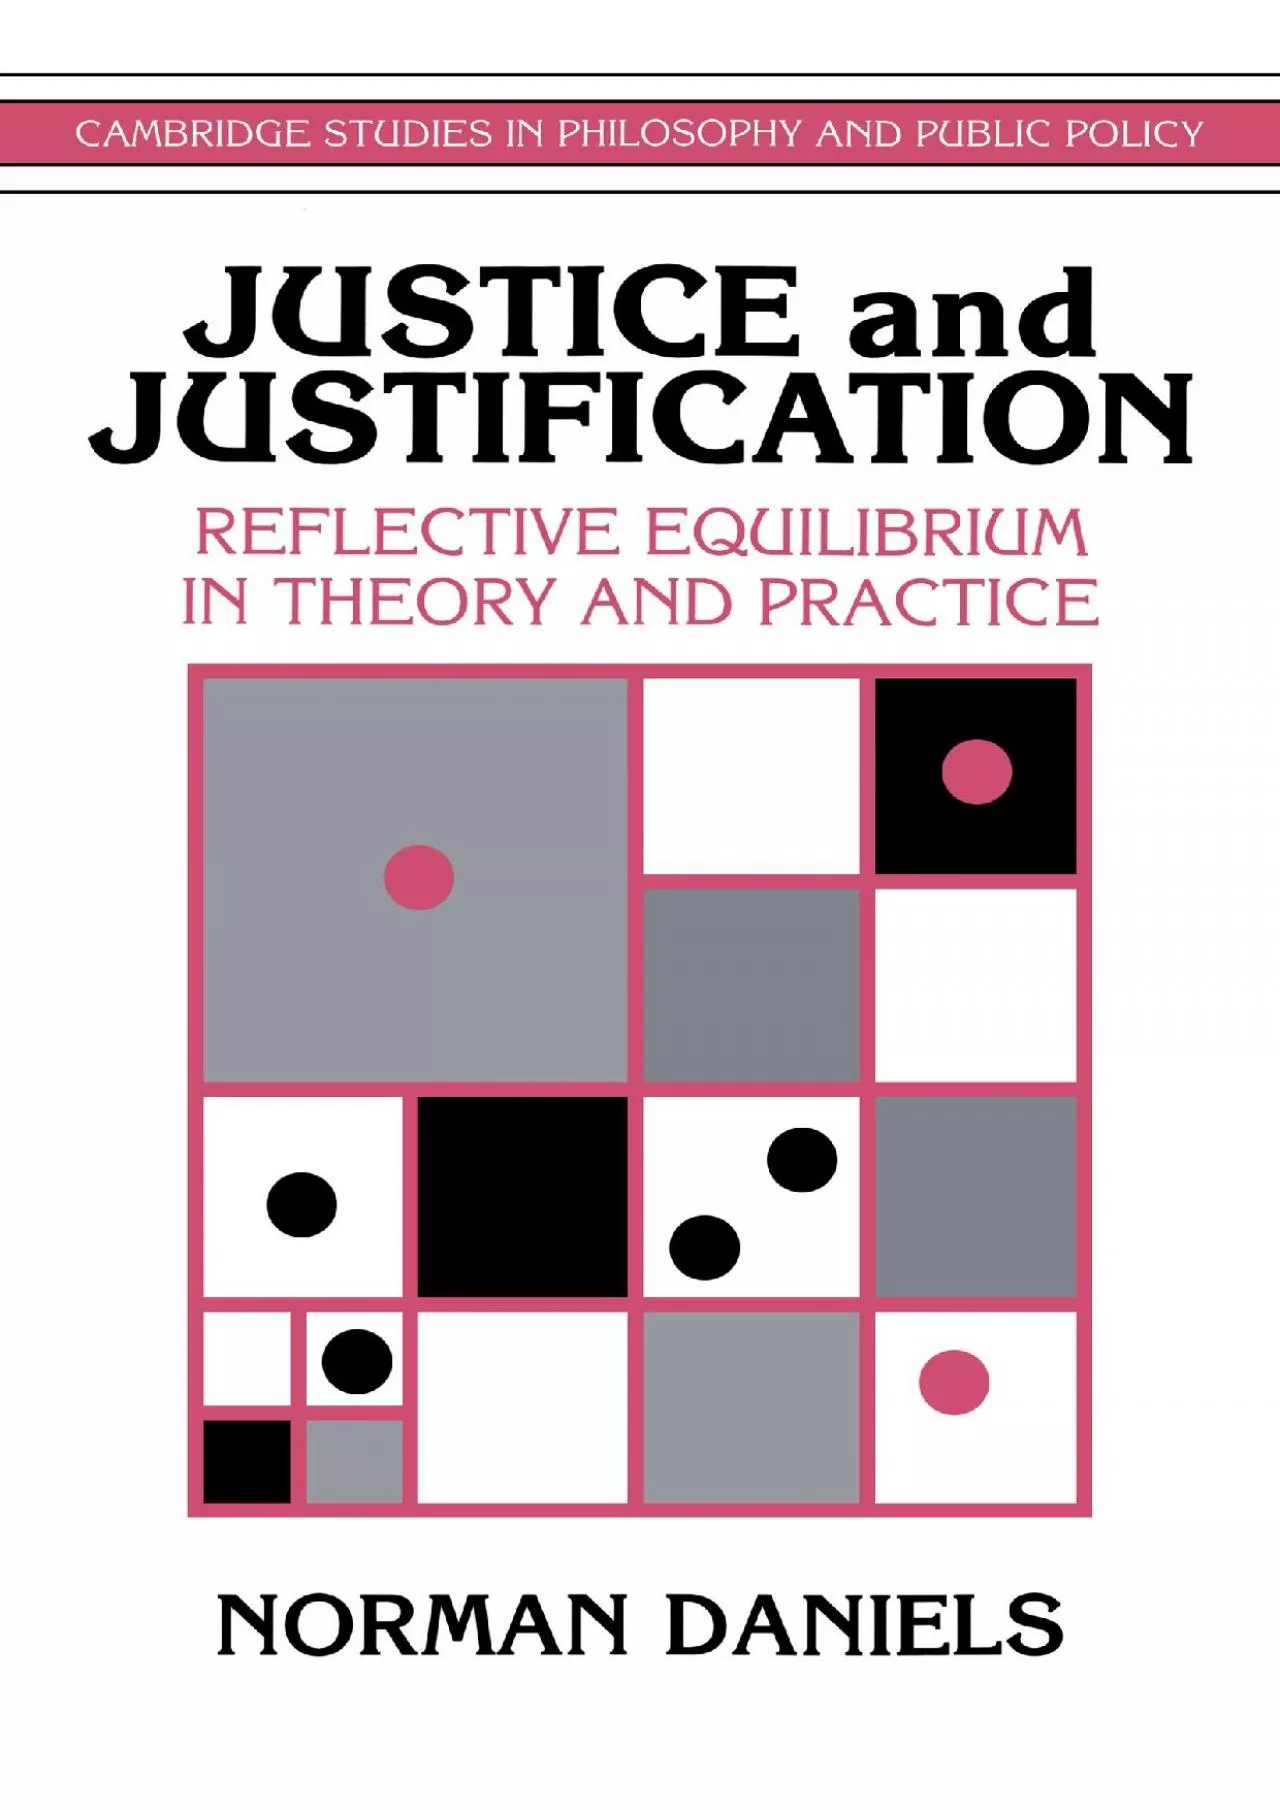 (DOWNLOAD)-Justice and Justification: Reflective Equilibrium in Theory and Practice (Cambridge